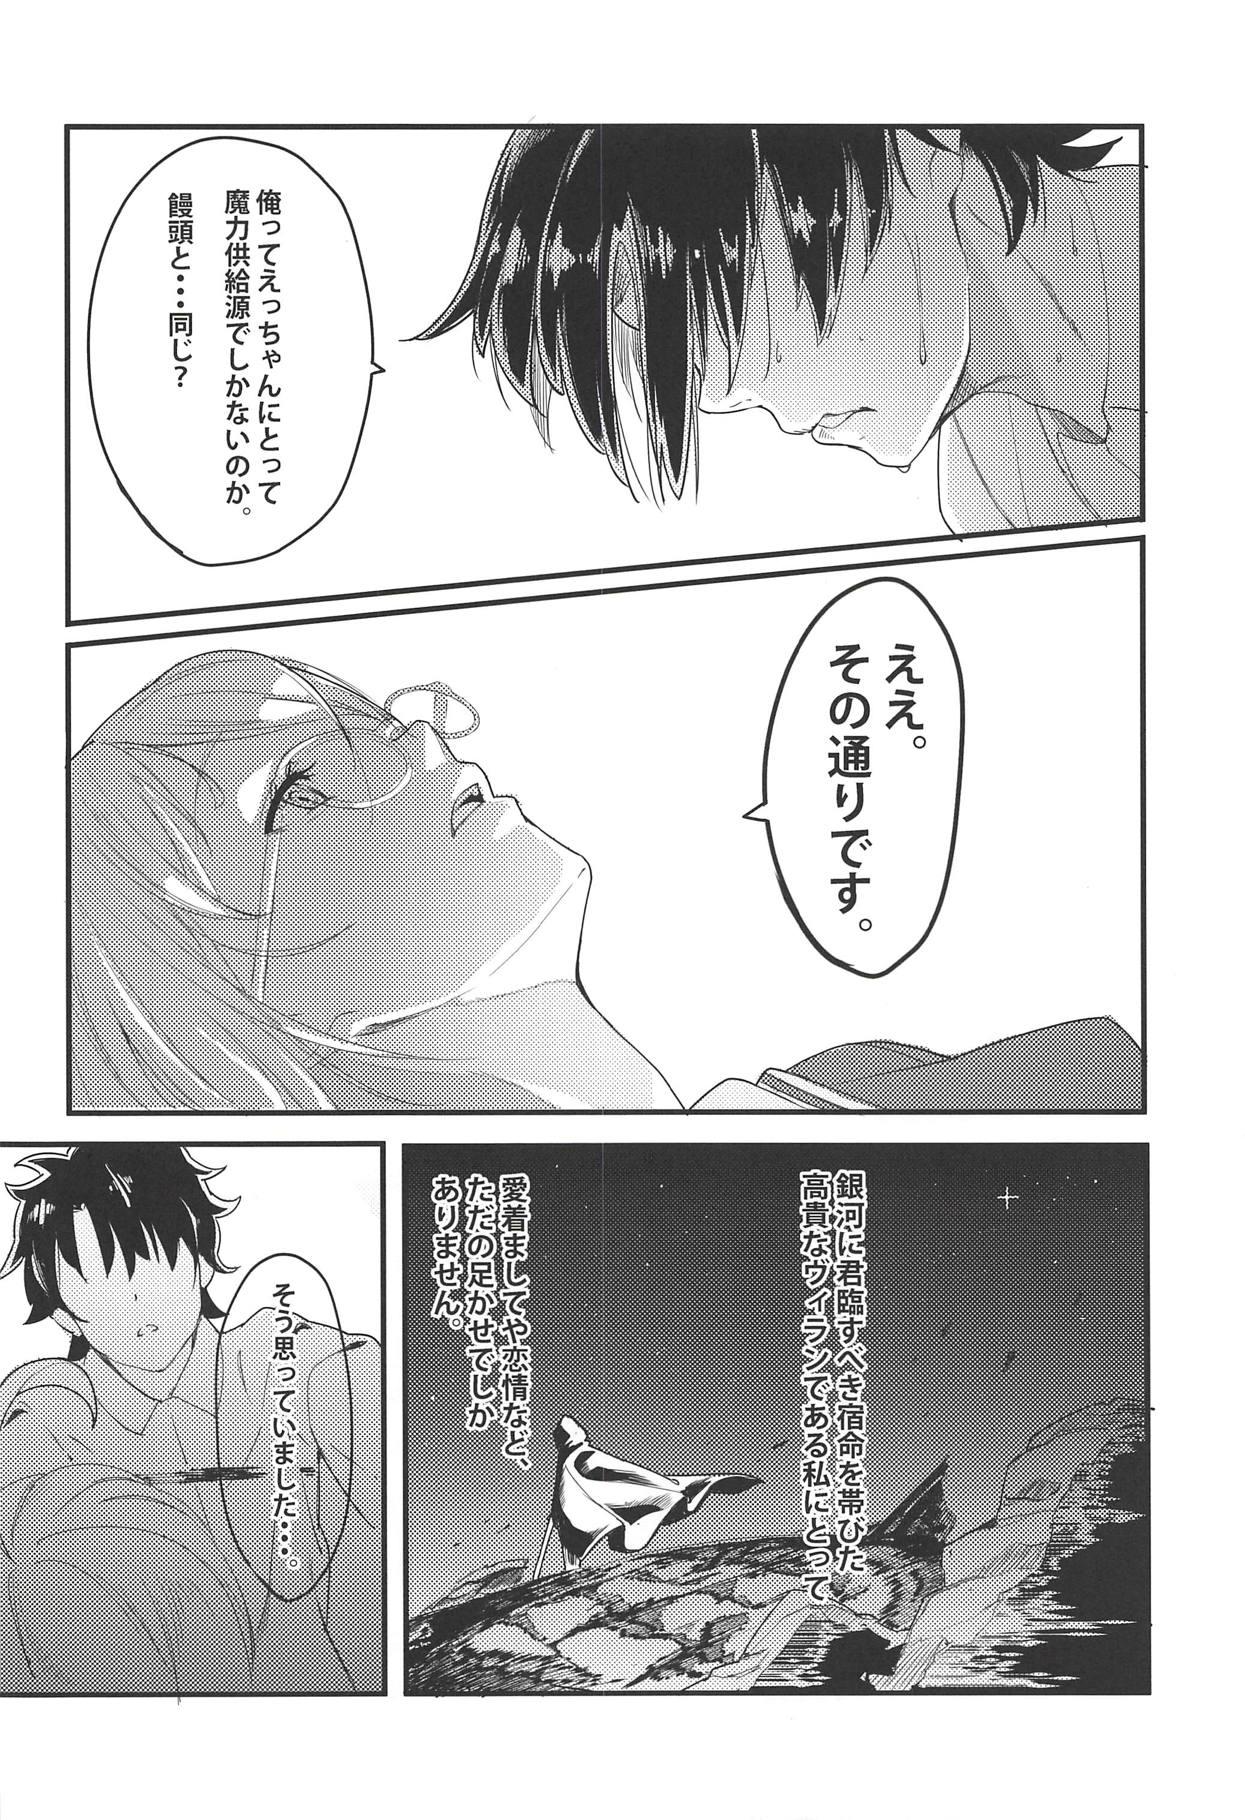 Ex Gf SOMEWHERE OUT IN SPACE - Fate grand order Amatuer - Page 7